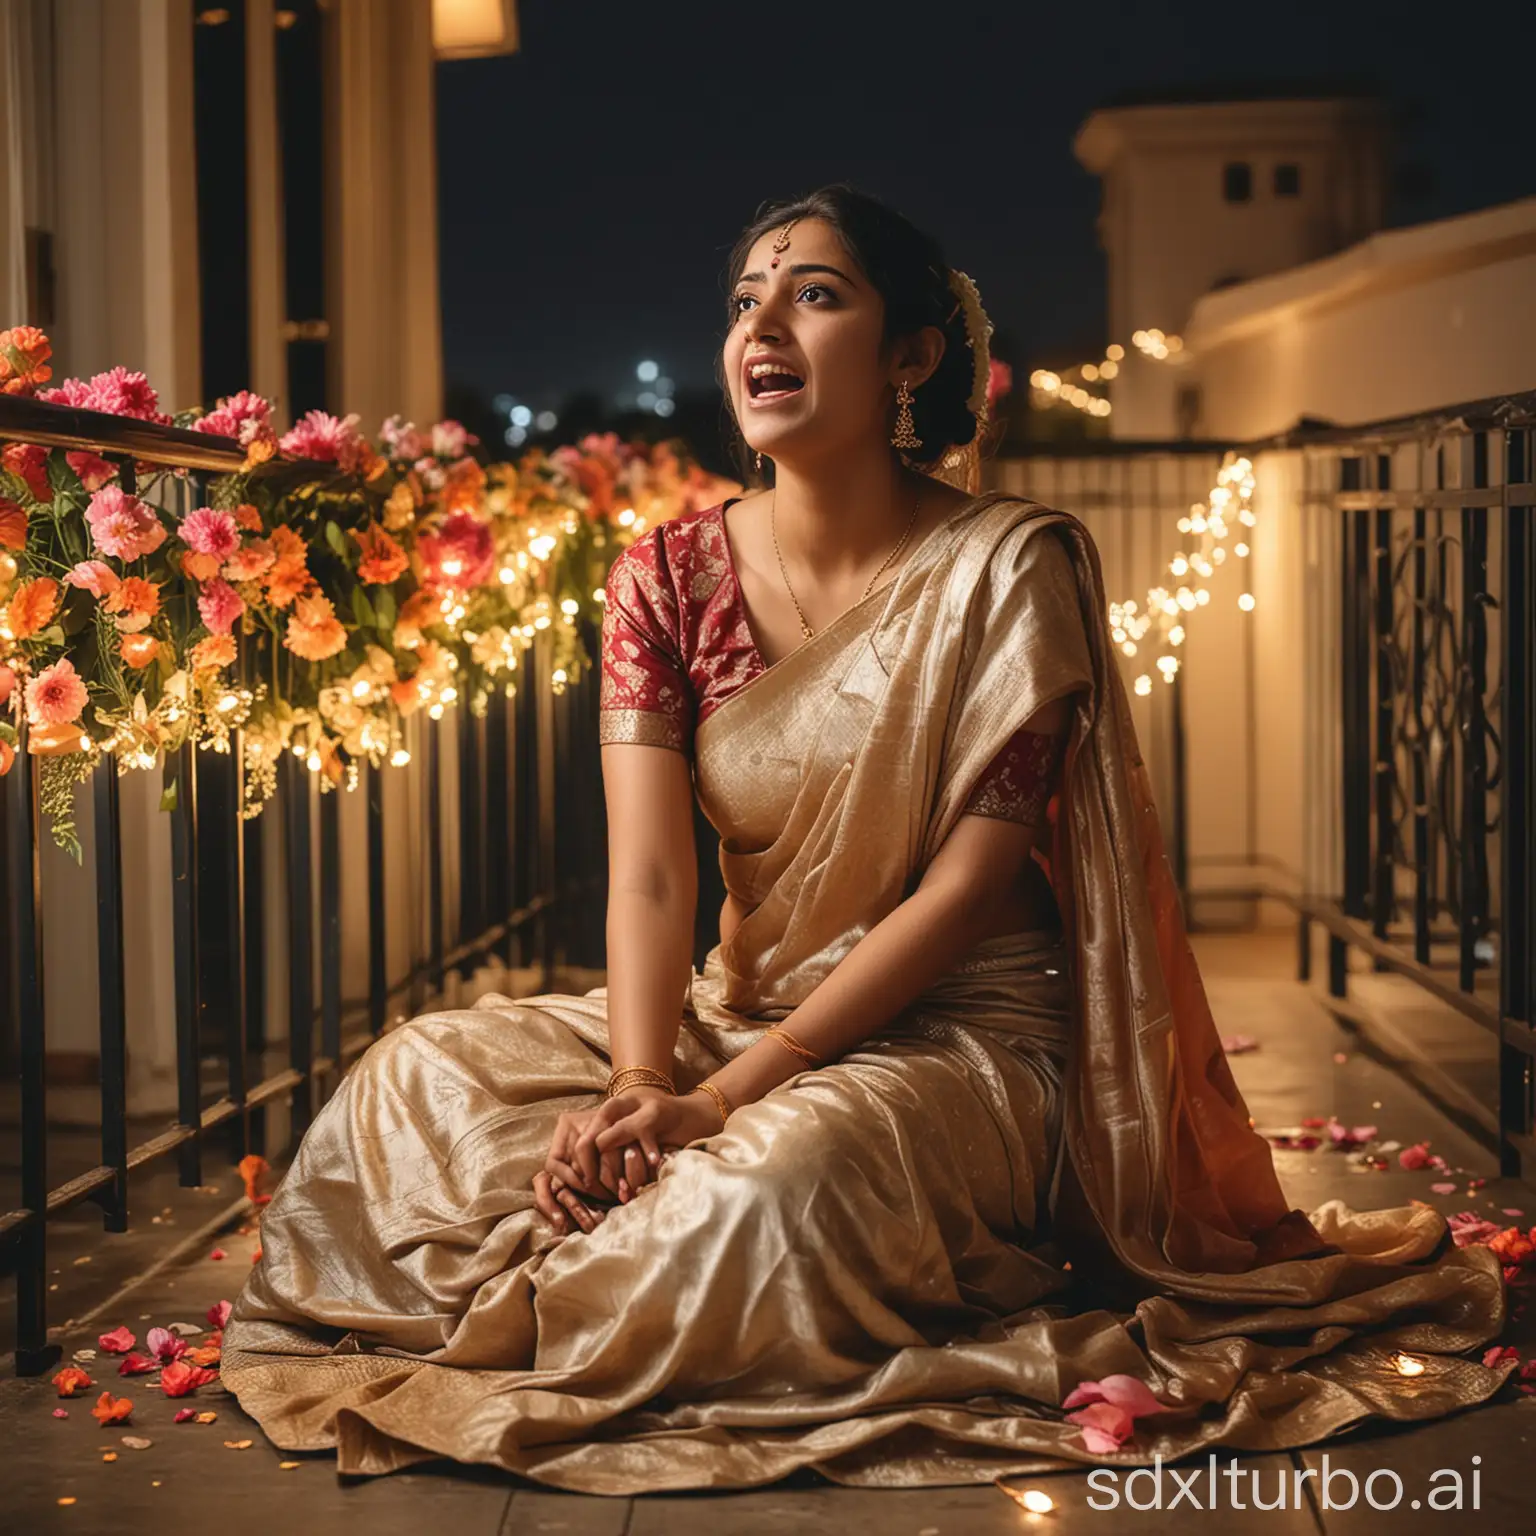 Young-Woman-in-Silk-Saree-Screaming-in-Fear-on-Balcony-Decorated-with-Flowers-and-Lights-at-Night